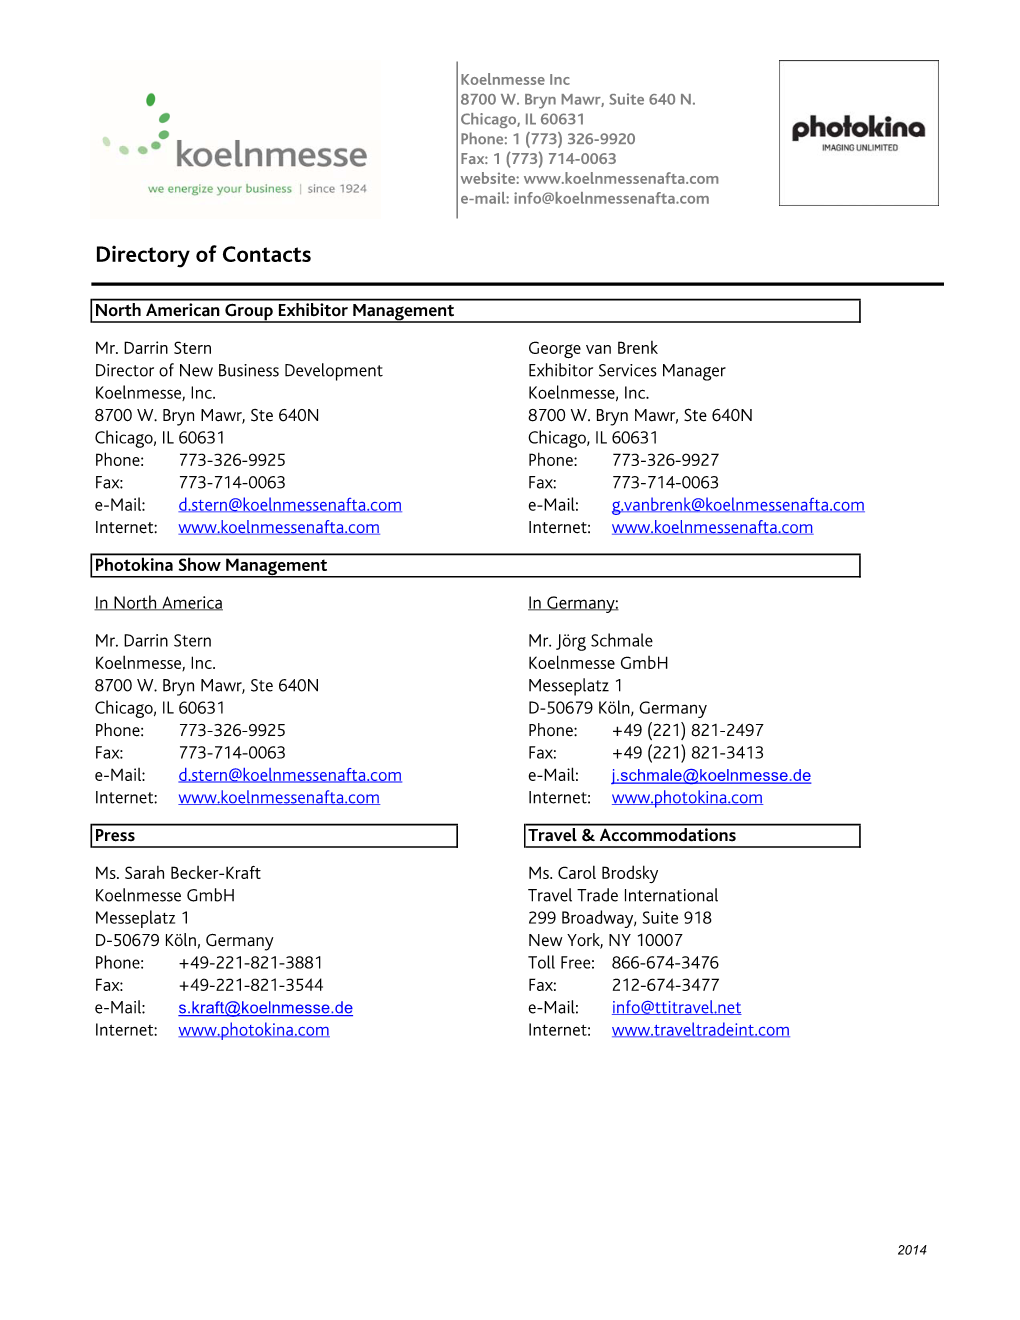 Directory of Contacts